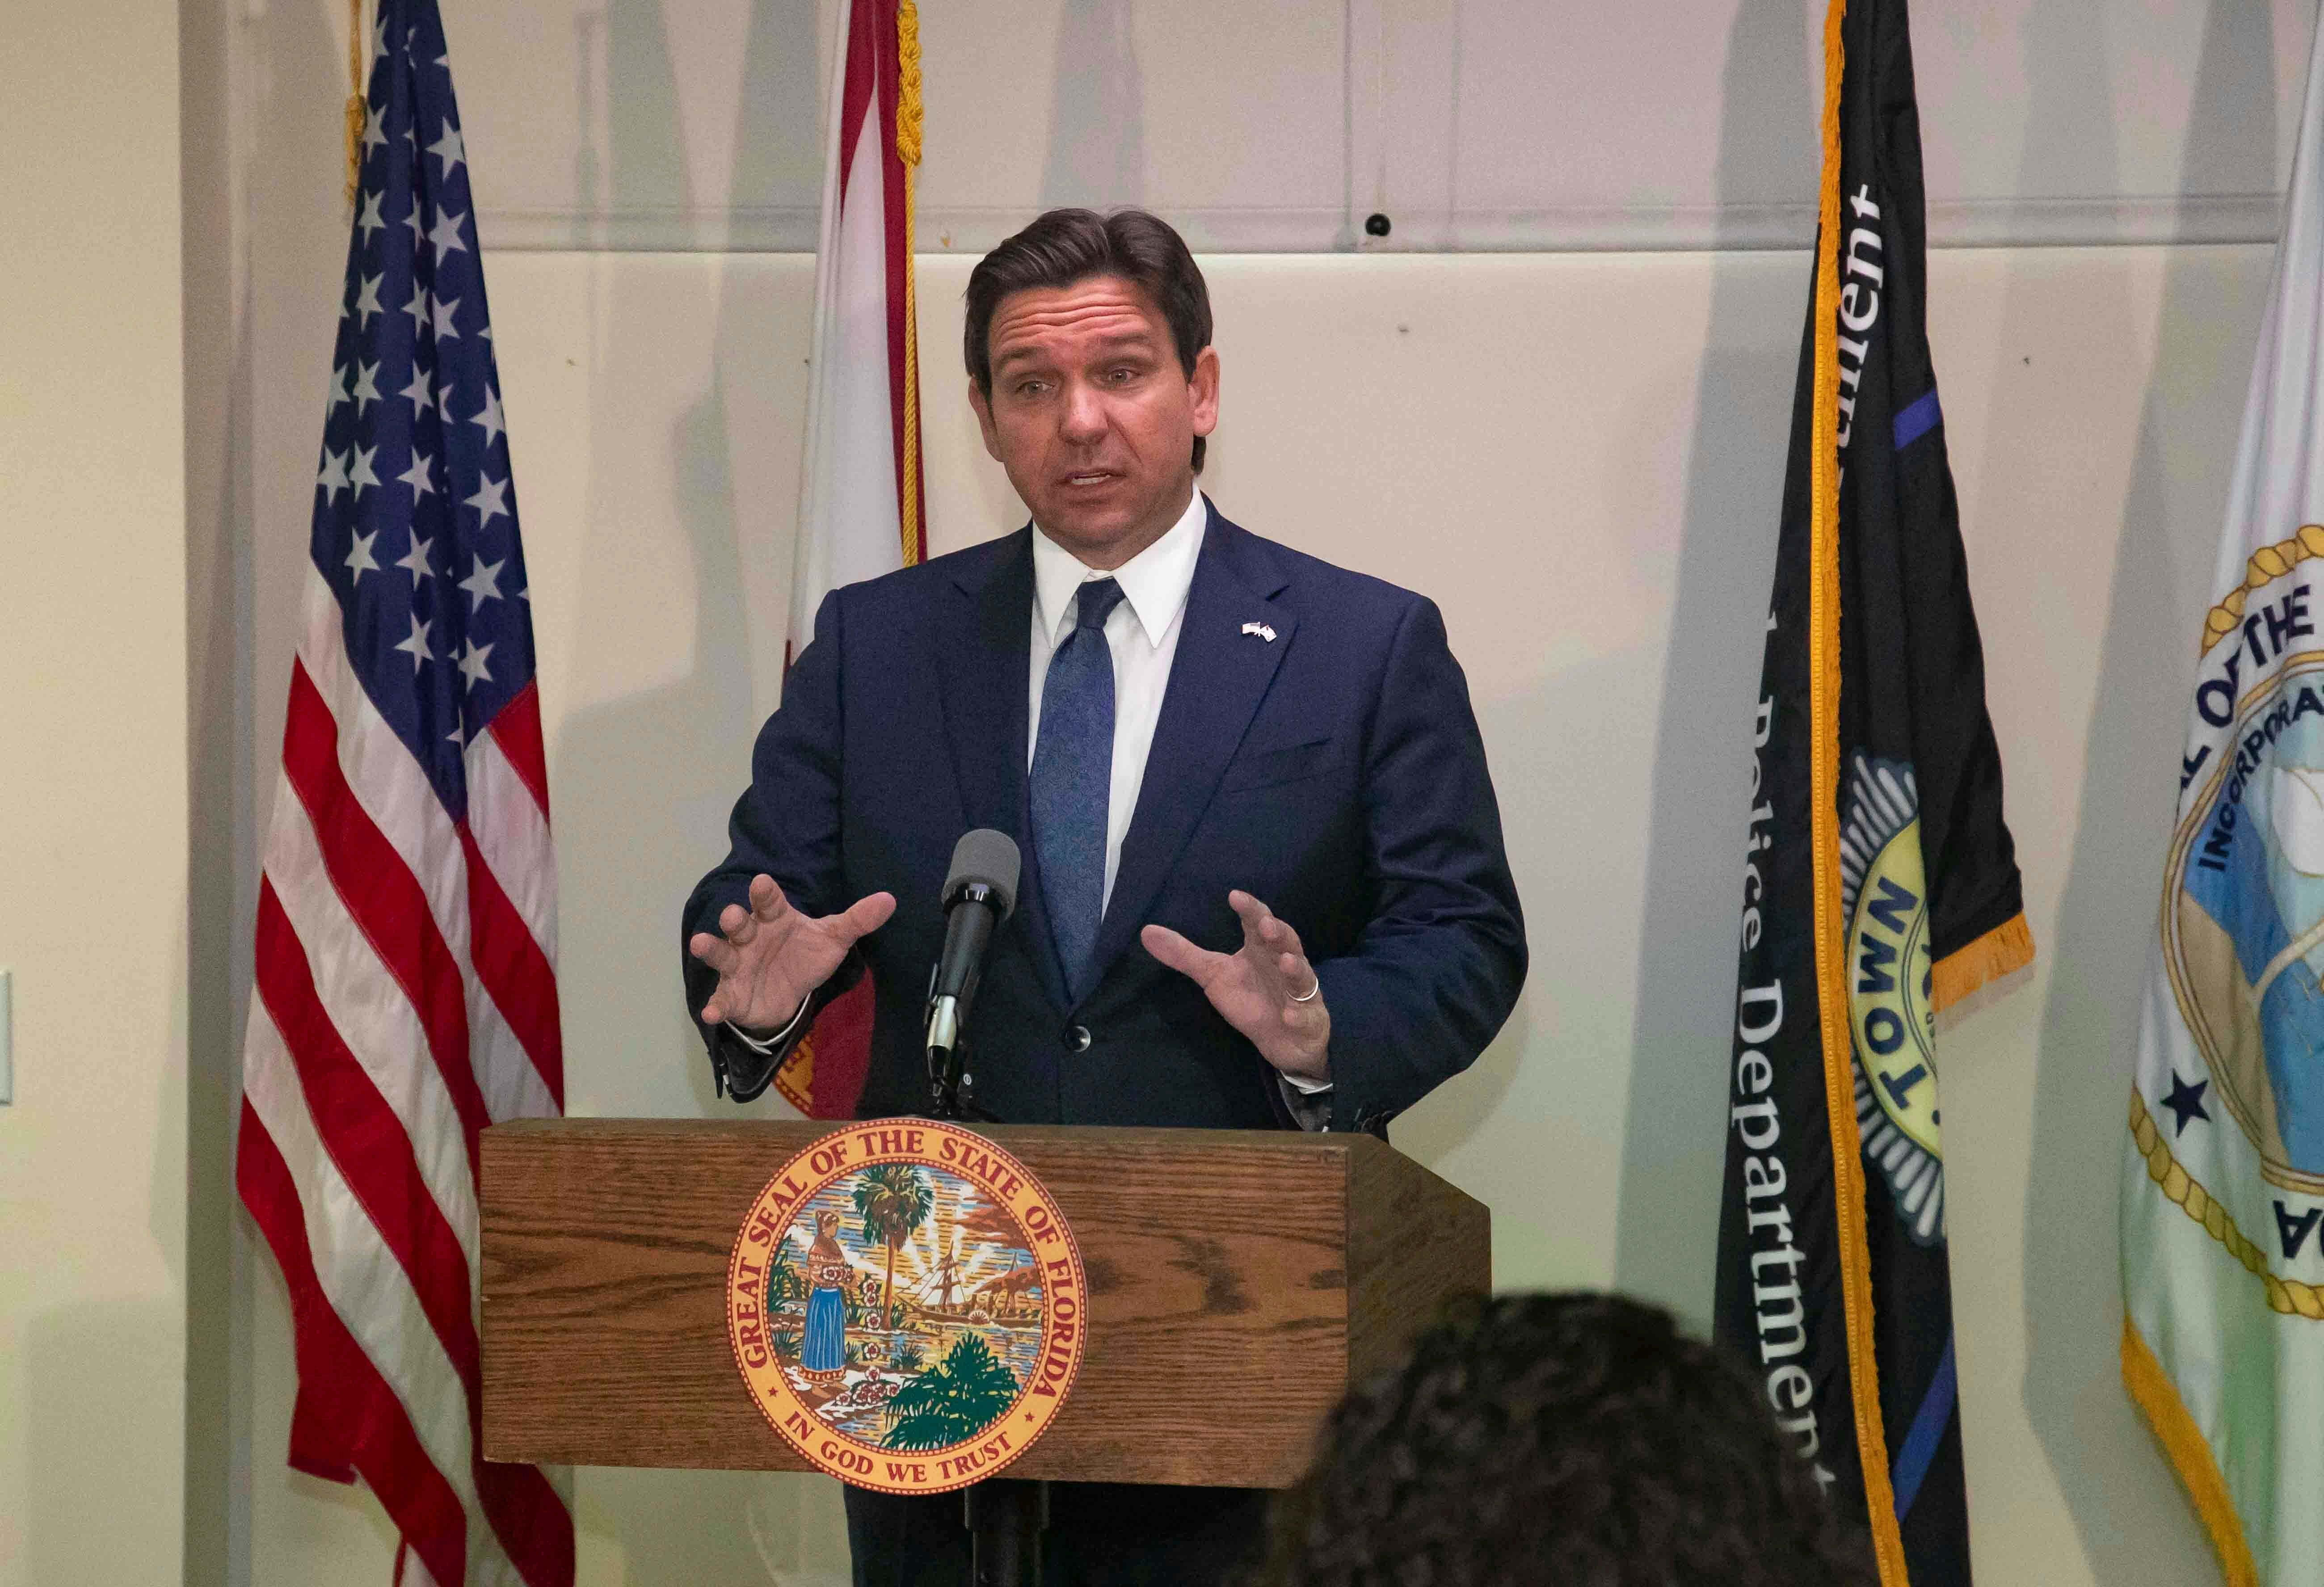 Florida Governor Ron DeSantis signed a bill in February allowing the unsealing of the Epstein transcripts on Monday